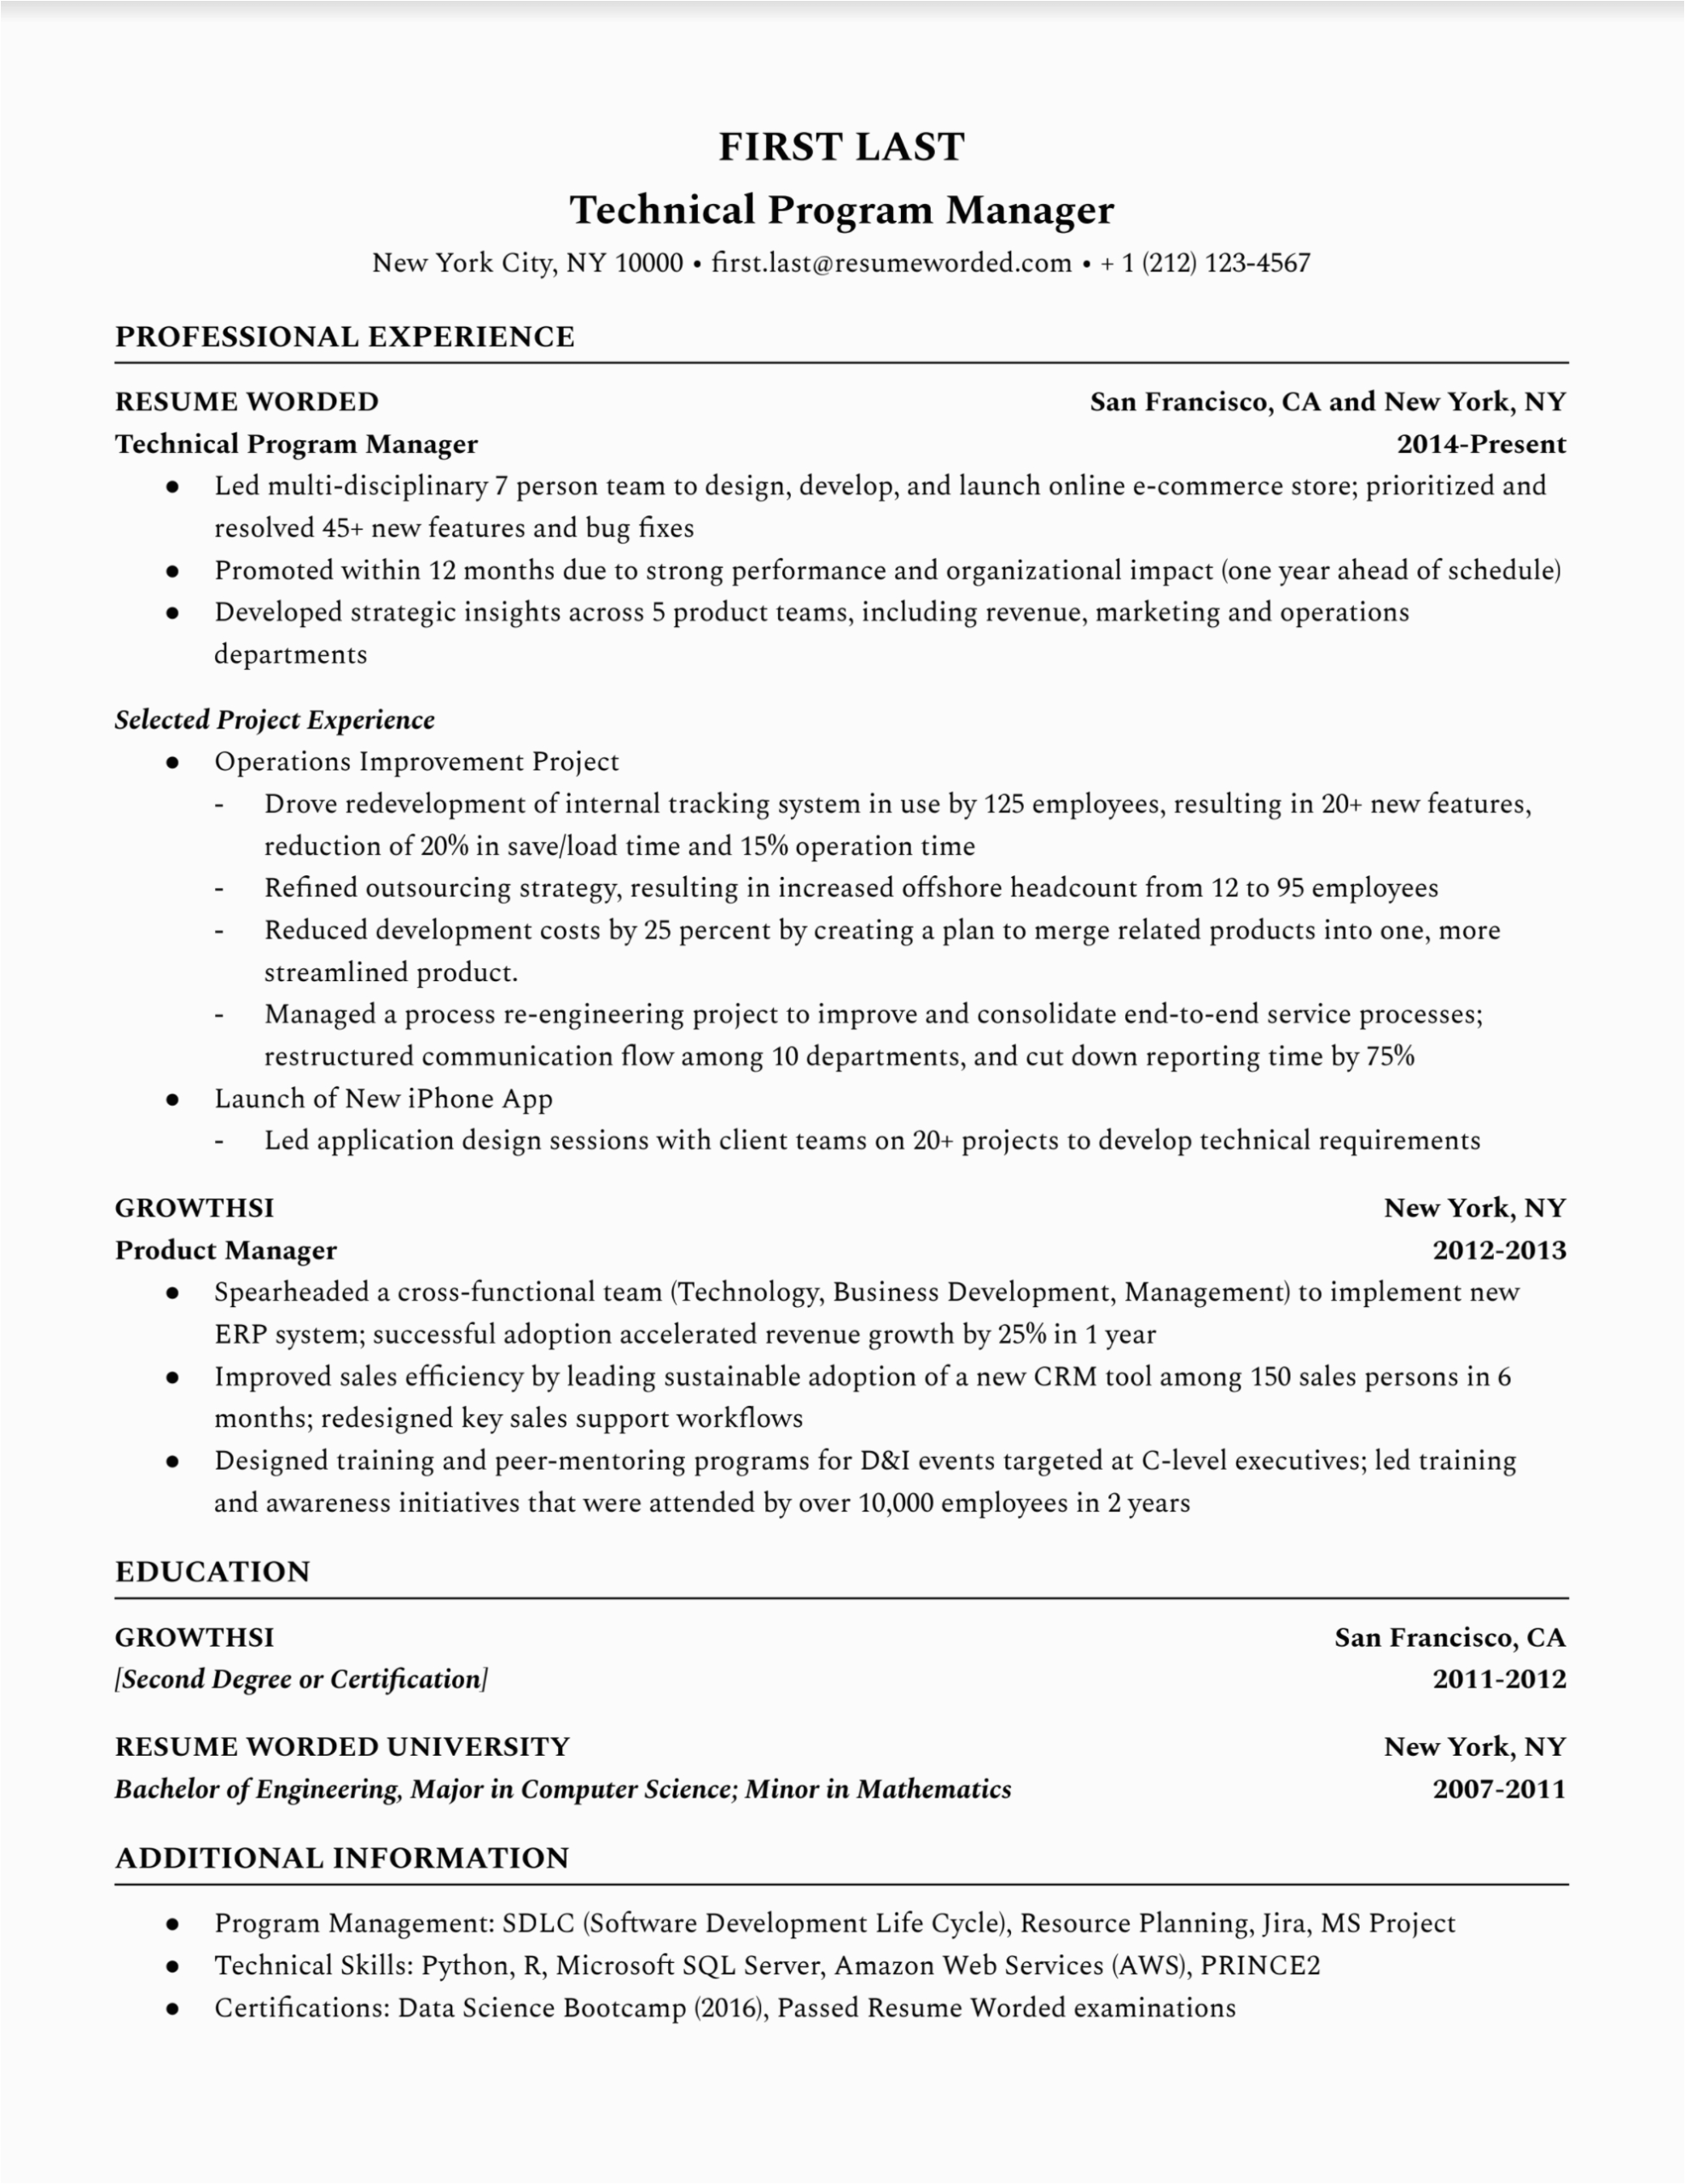 Resume Samples for Technical Program Managers Technical Program Manager Resume Example for 2022